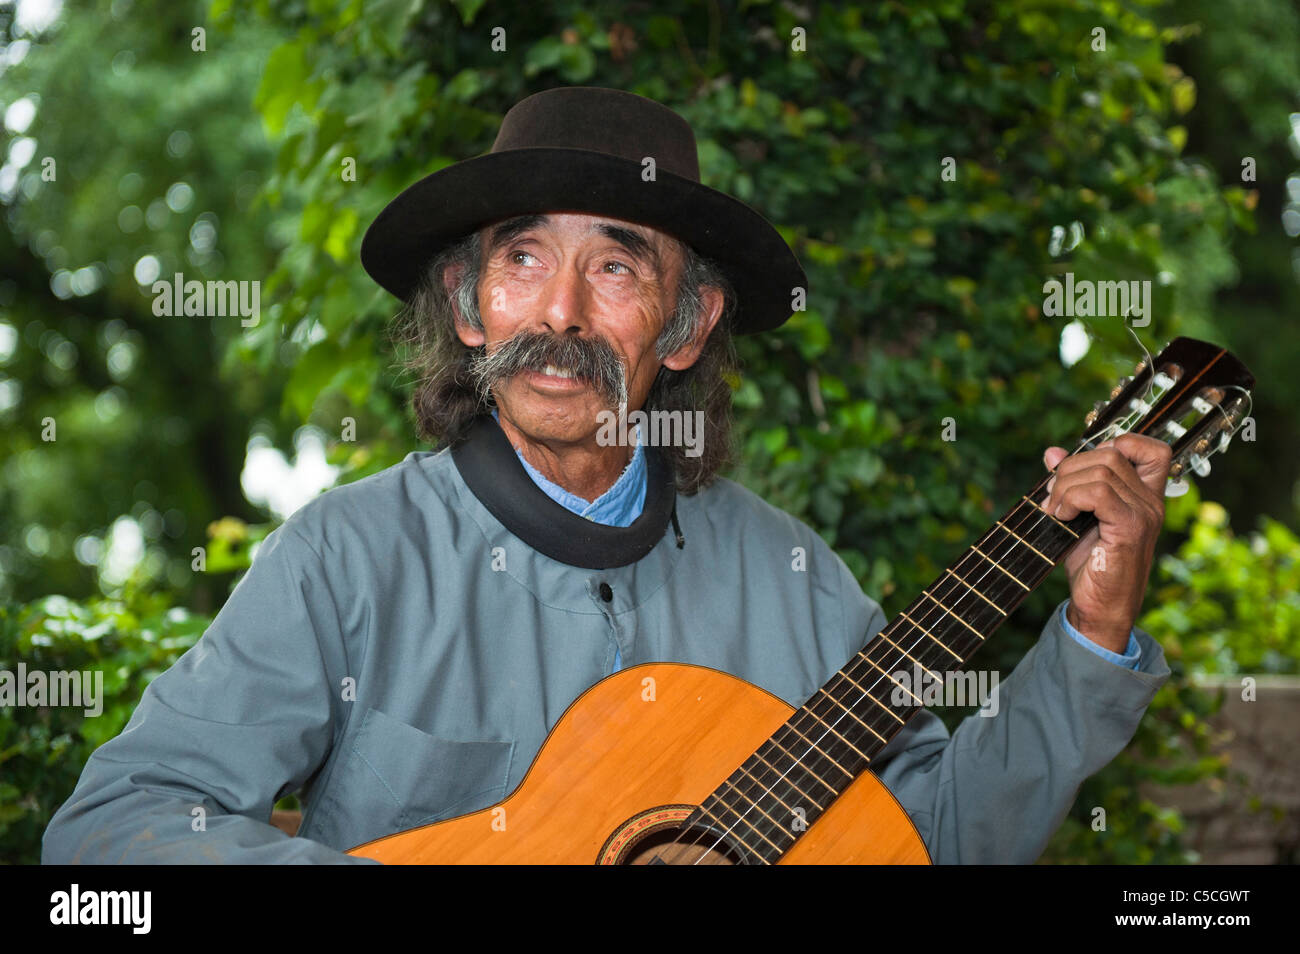 Gaucho singing and playing guitar, San Antonio de Areco, Buenos Aires Province, Argentina Stock Photo